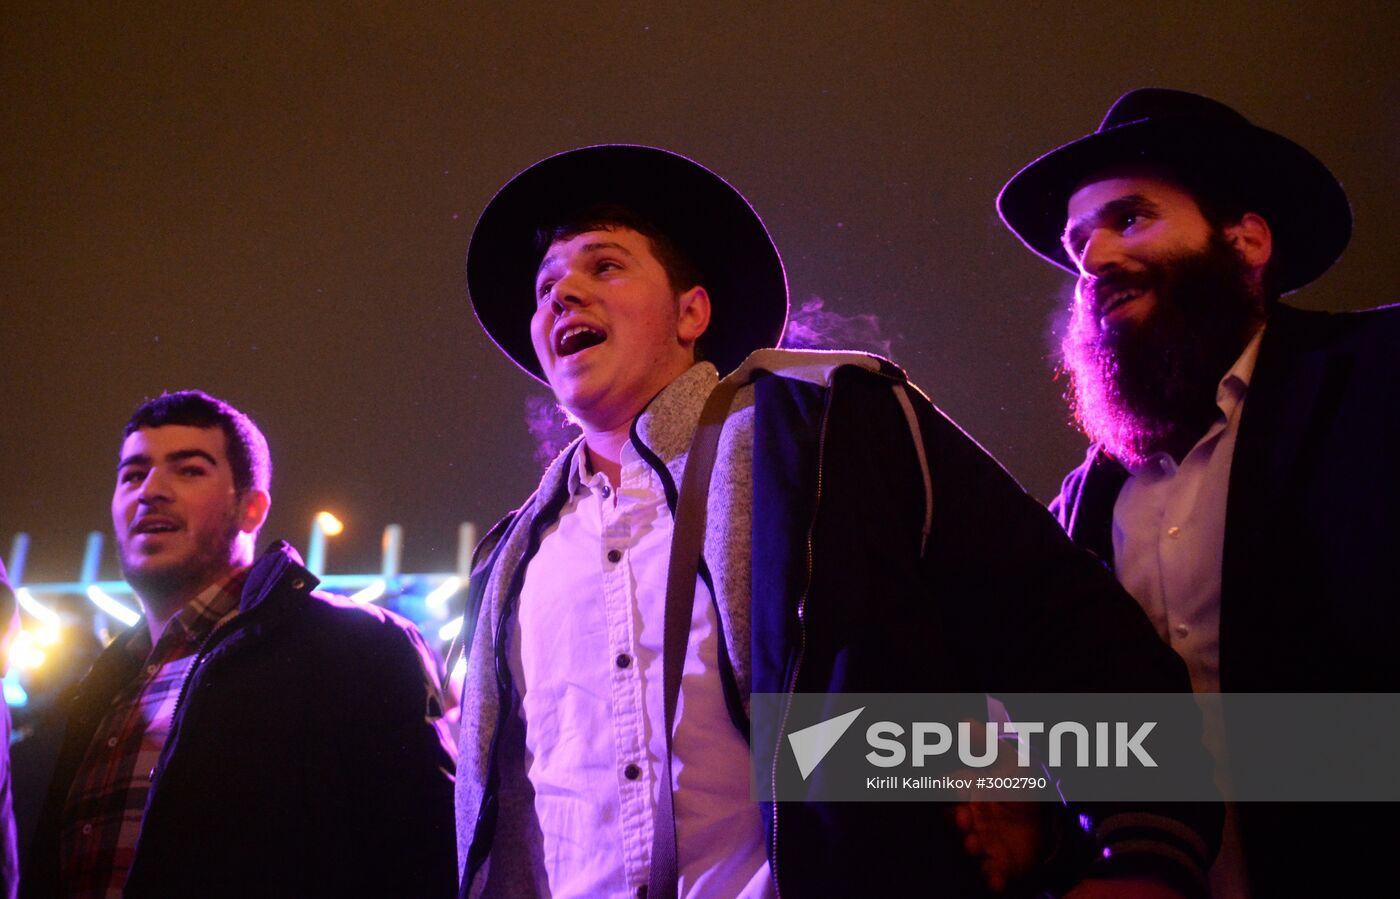 Procedure for lighting Chanukah candles on Revolution Square in Moscow